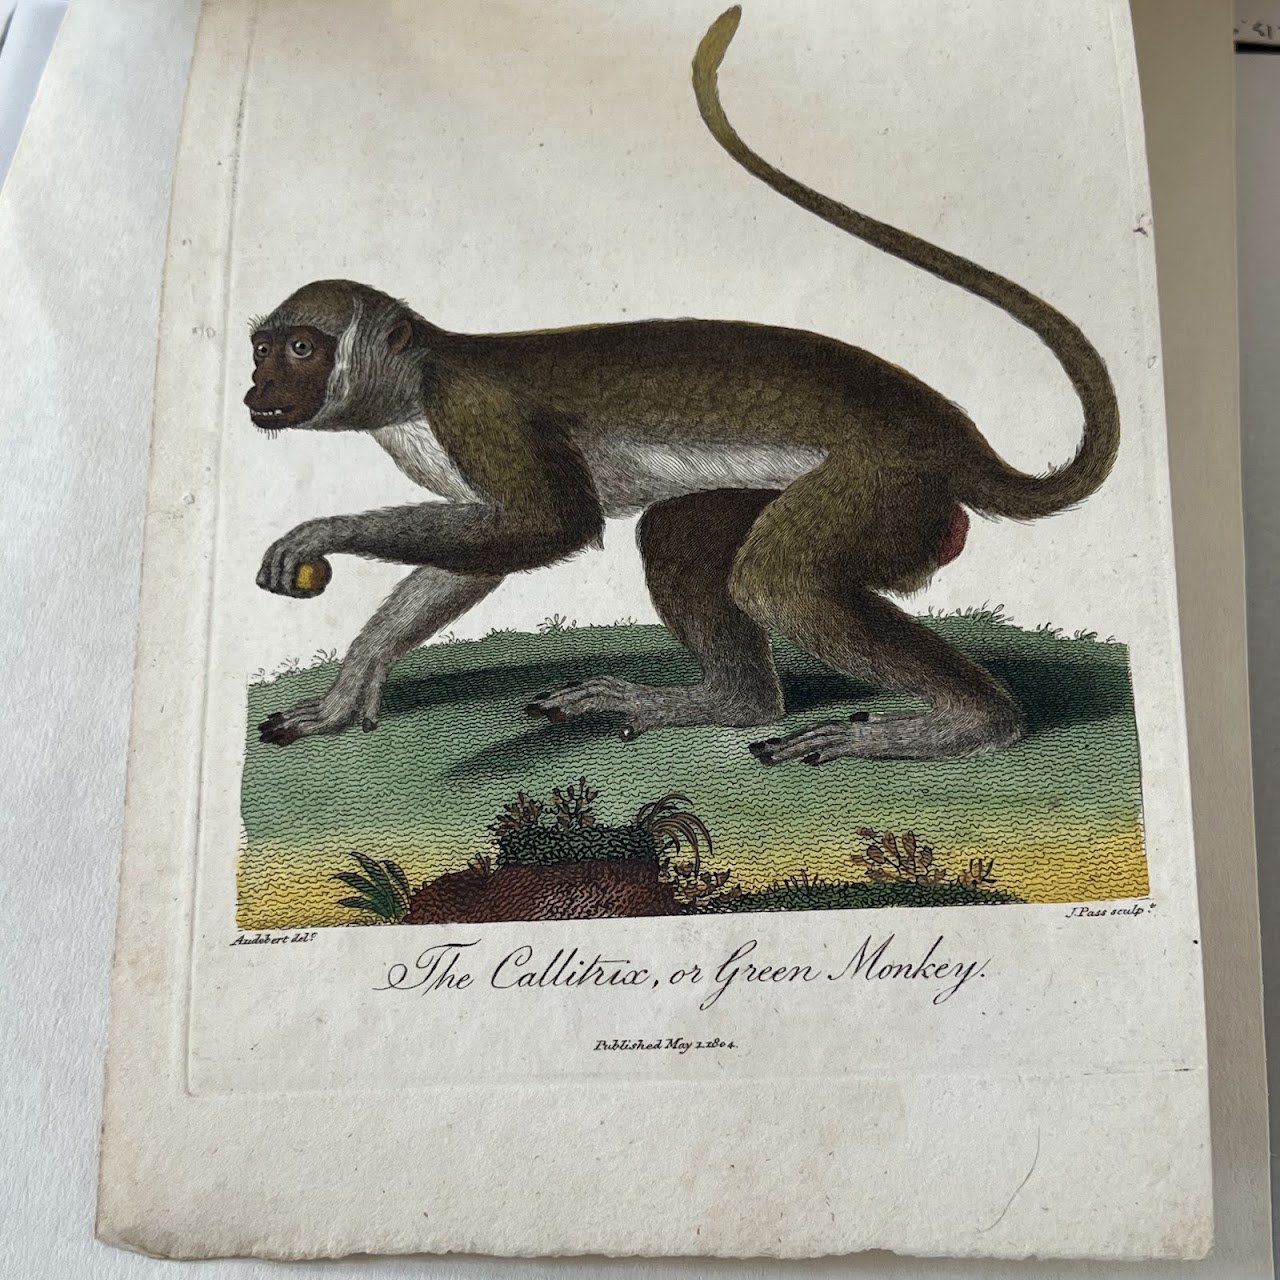 Early 19th C. Hand Colored Engraving 'The Callitrex, or Green Monkey'